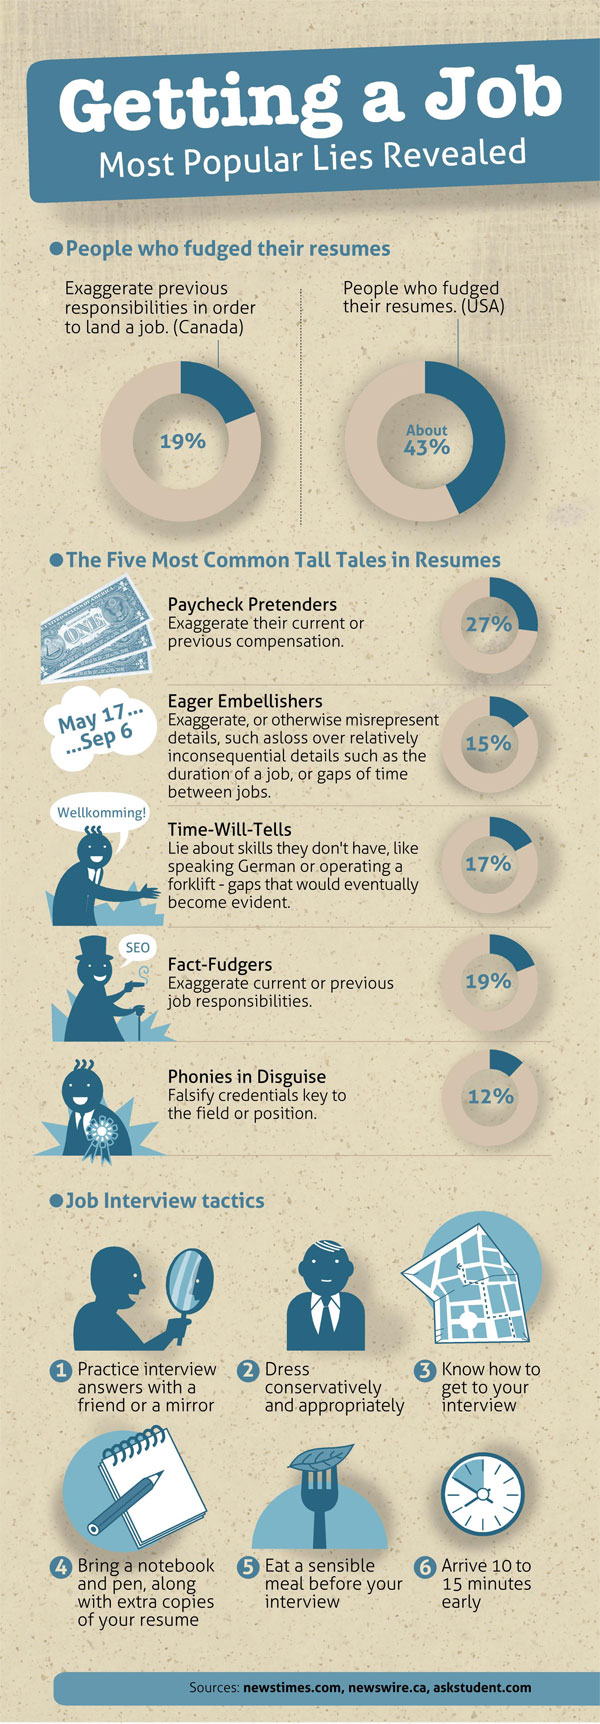 Getting a Job Most Popular Lies Revealed (Infographic